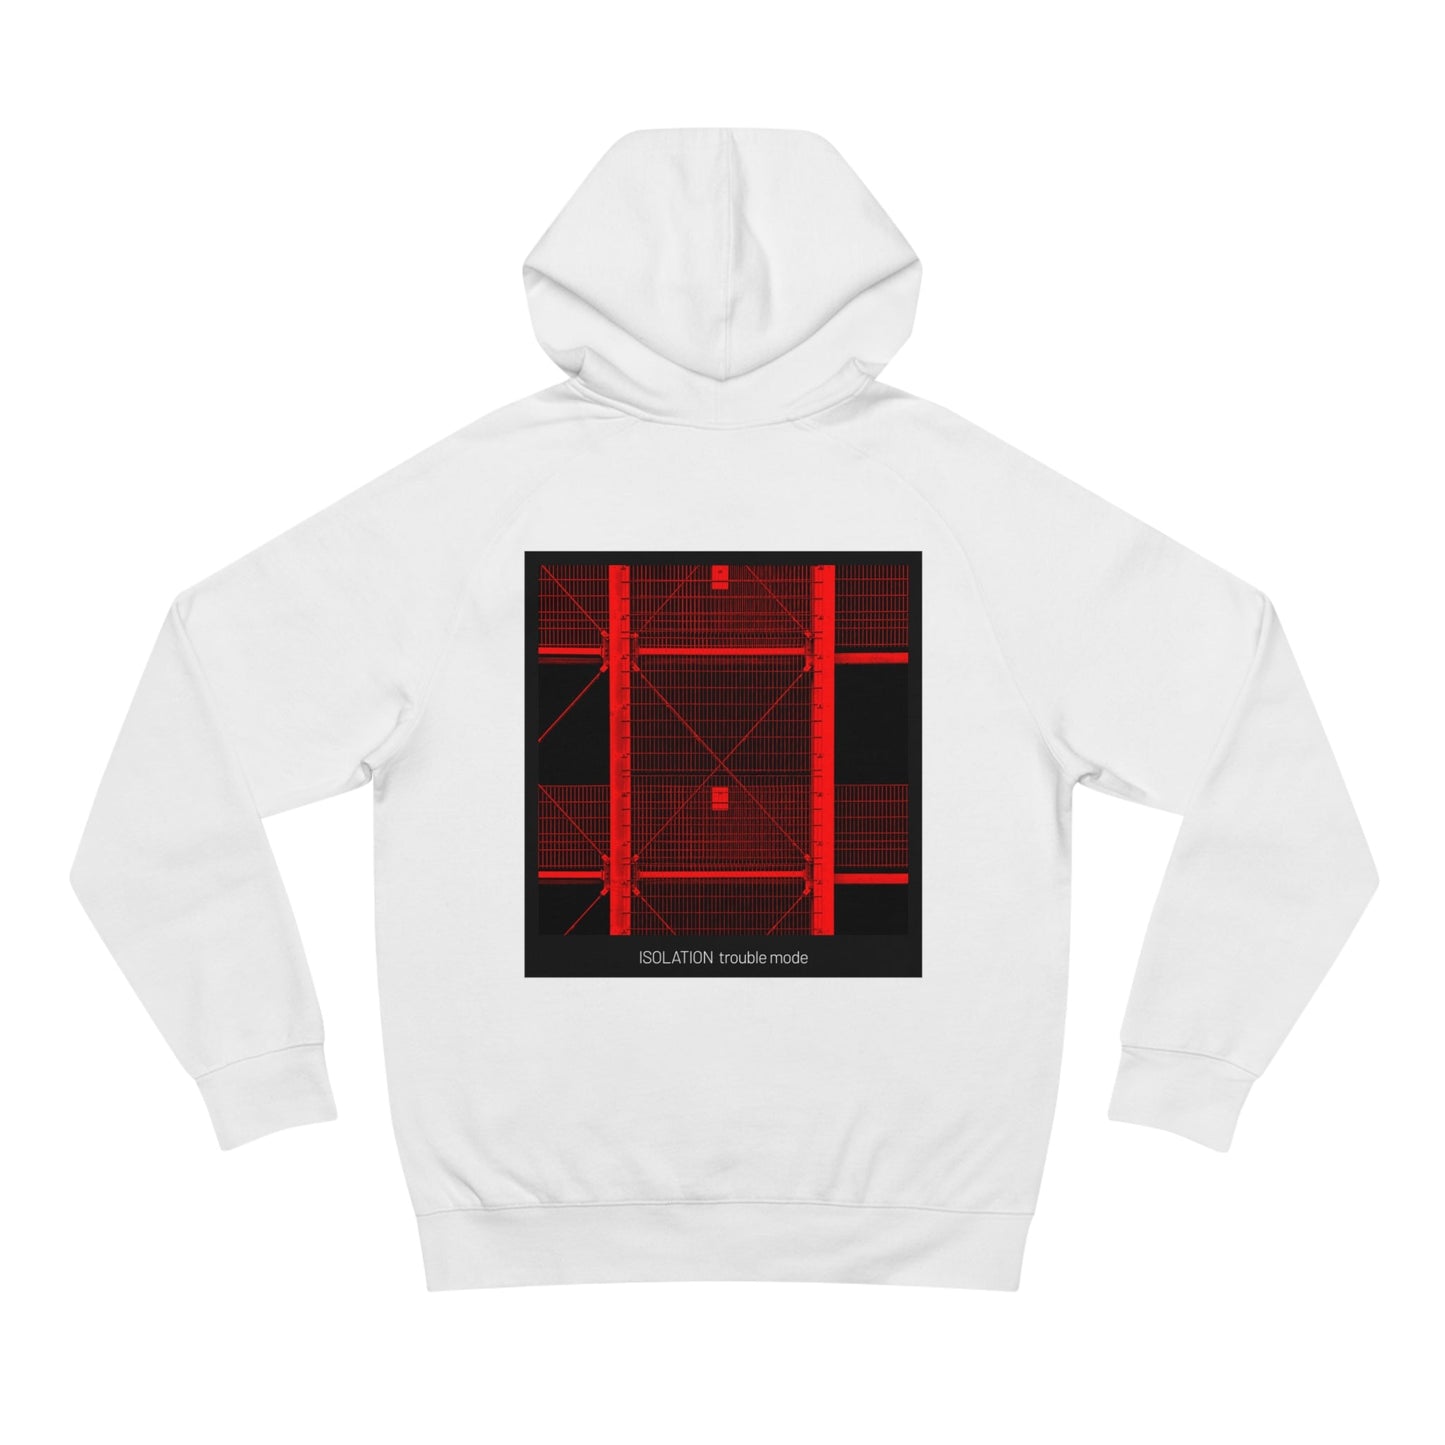 ISOLATION trouble mode - Playlist Hoodie - Pure Neo Shop